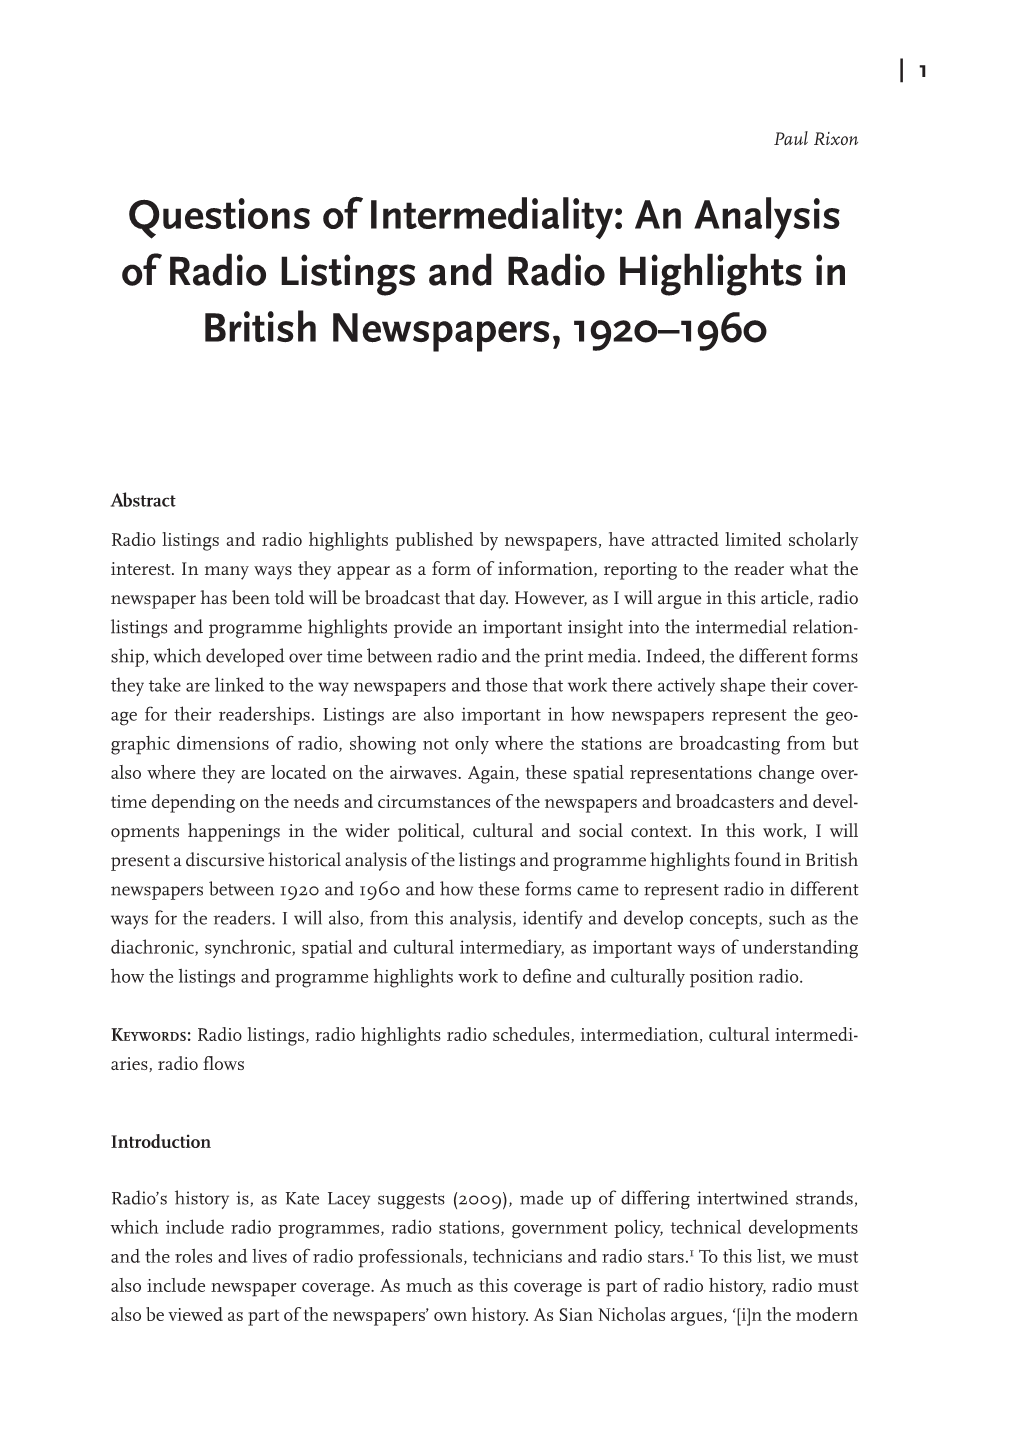 An Analysis of Radio Listings and Radio Highlights in British Newspapers, 1920–1960